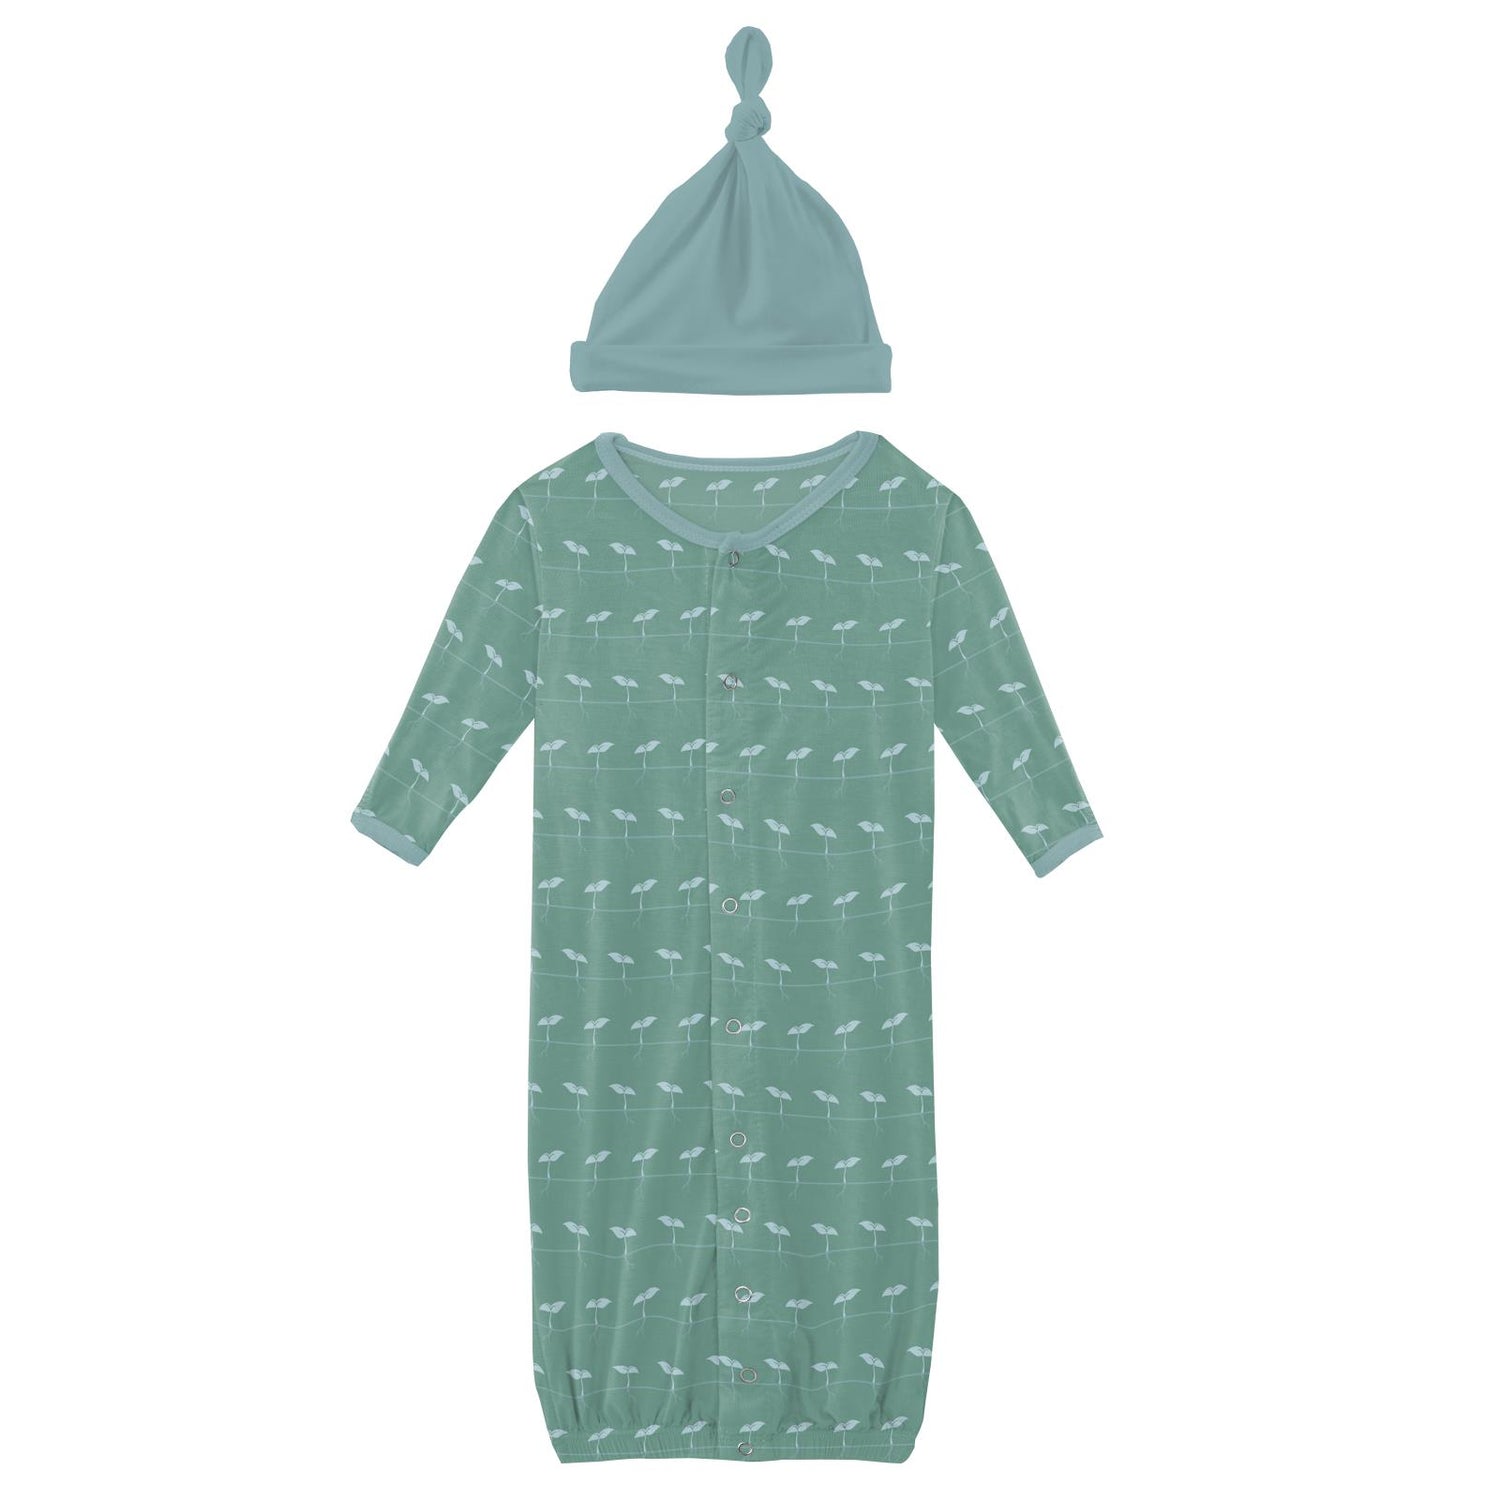 Print Layette Gown Converter & Single Knot Hat Set in Shore Sprouts